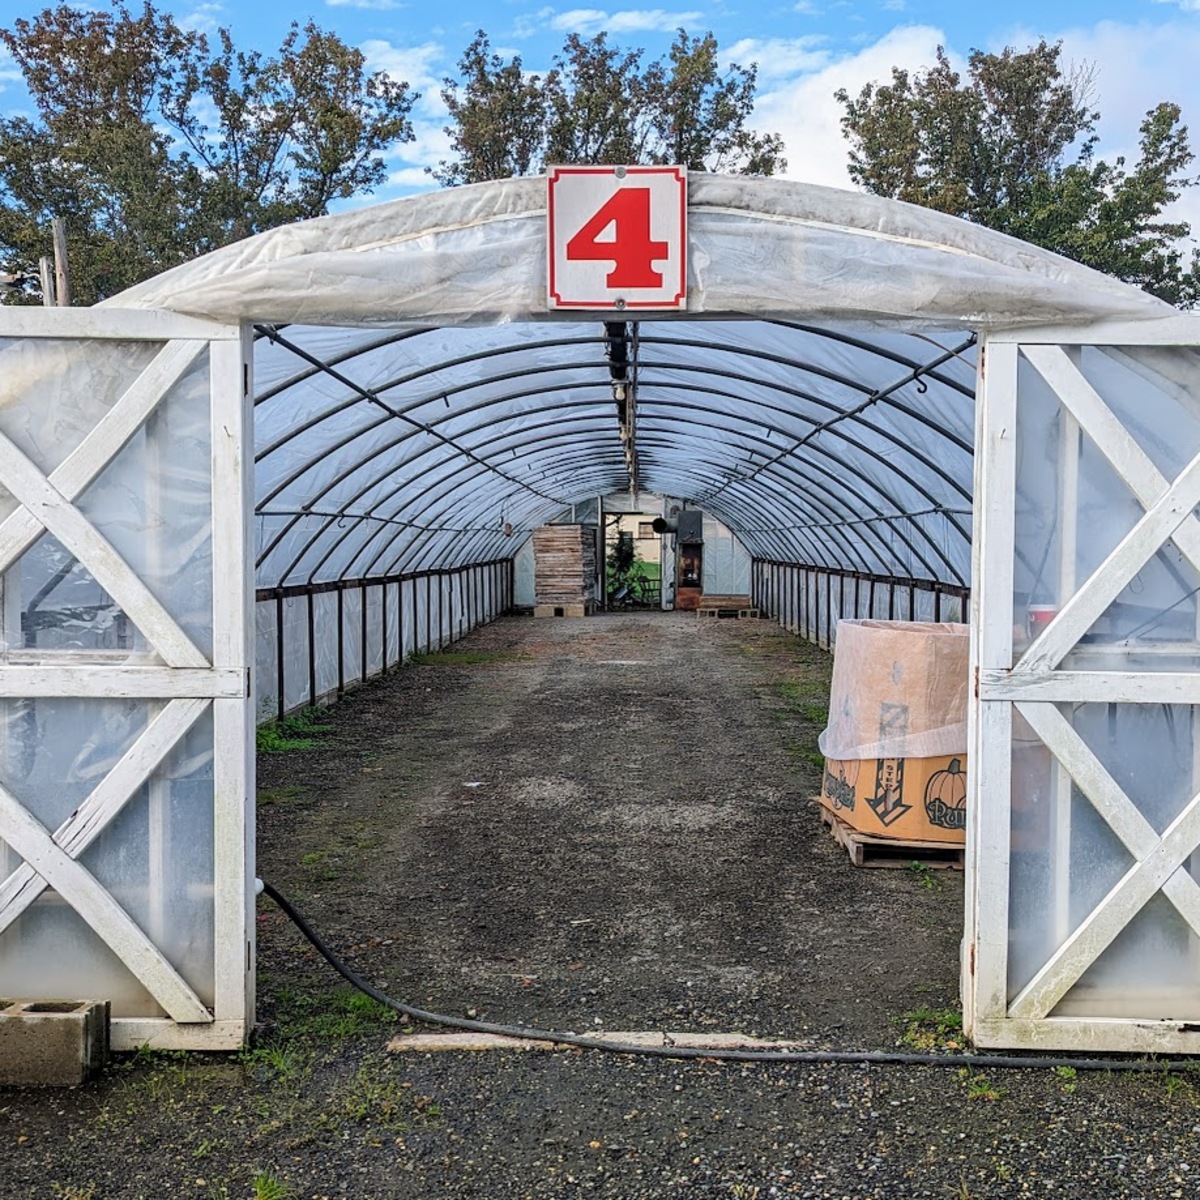 Looking into a long empty greenhouse, a single box toward the front open wooden doors. The number 4 in bright orange red hangs above the door.